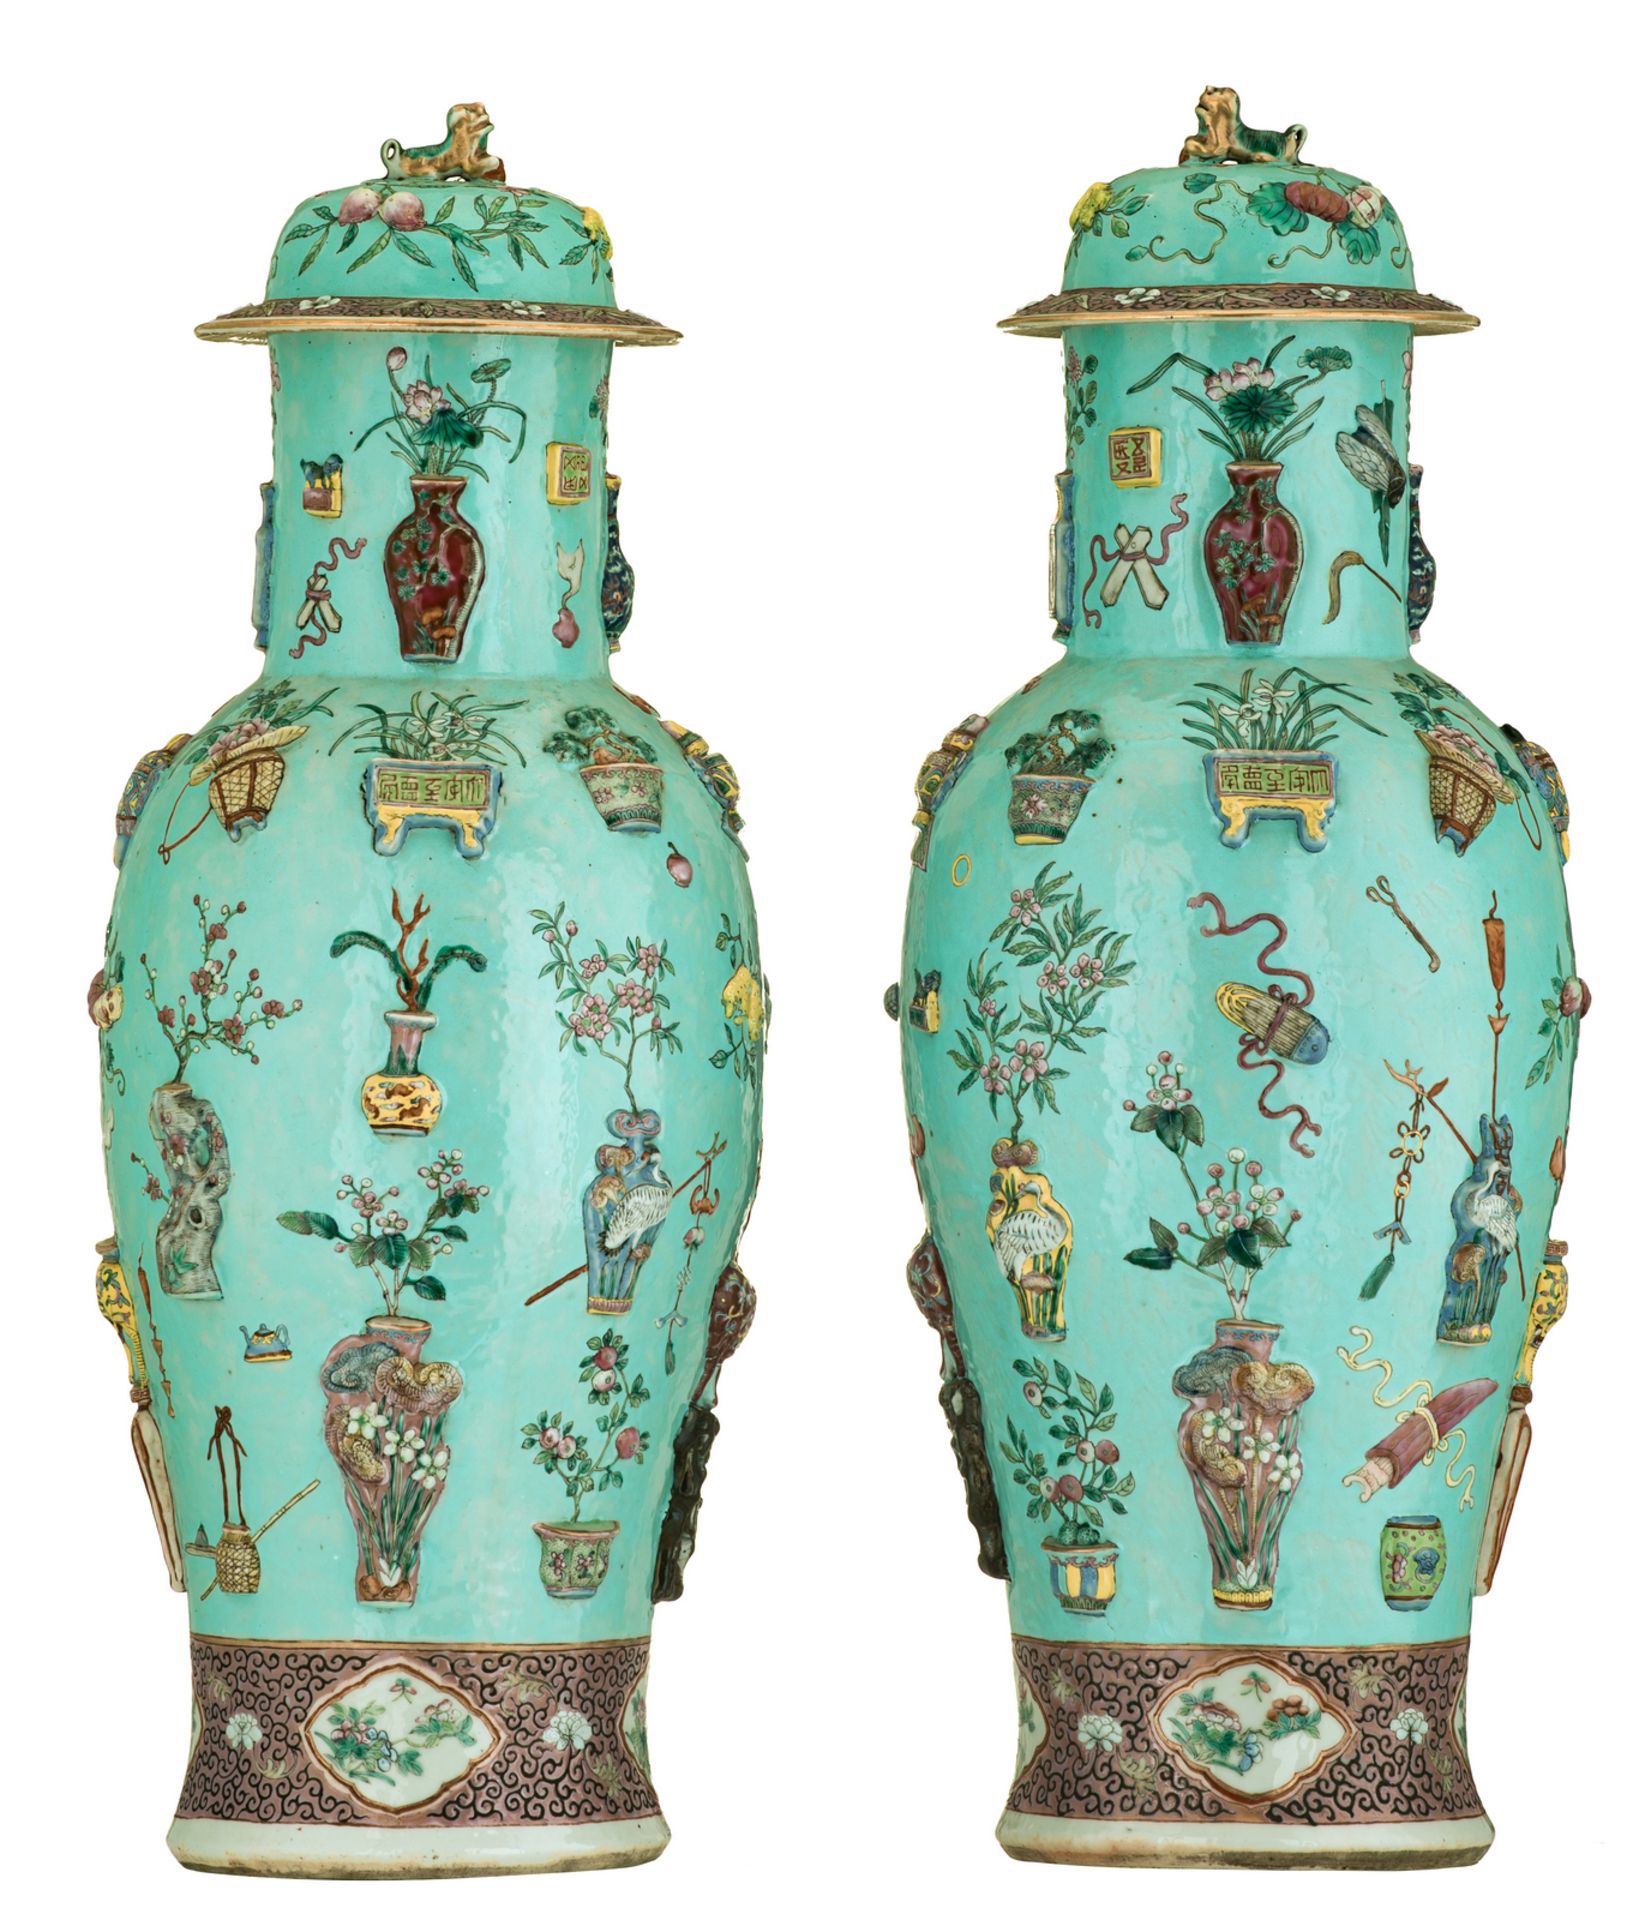 A fine pair of Chinese turquoise ground famille rose vases and covers, relief moulded with